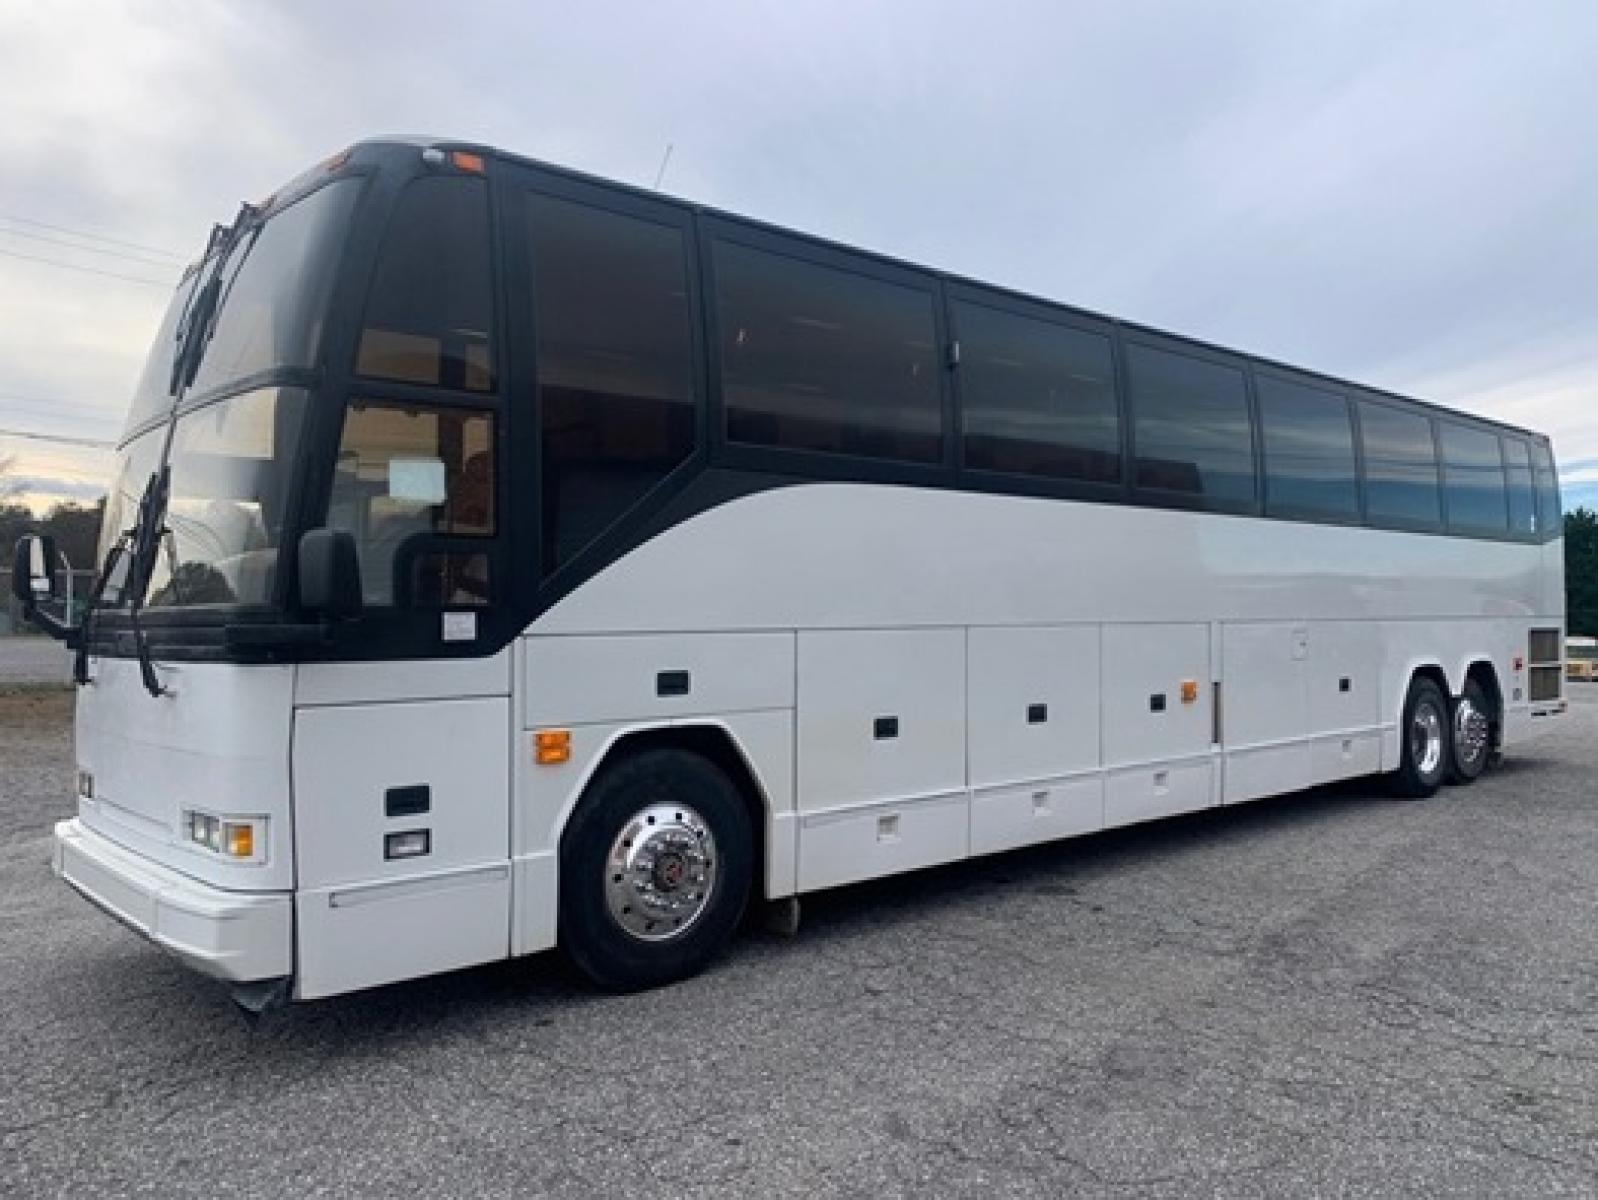 1995 White Prevost HS-45 with an Diesel engine, Allison transmission, 0.000000, 0.000000 - 1995 PREVOST HS-45 - Series 60 Detroit Diesel - Allison Automatic Transmission - 45' - Alloy Wheels - 56 Passengers - Enclosed Parcel Racks - 3 Flat Screens and DVD - Restroom - One Owner - Southern Coach Approx 1.1mil recent motor trans change. - Photo #4